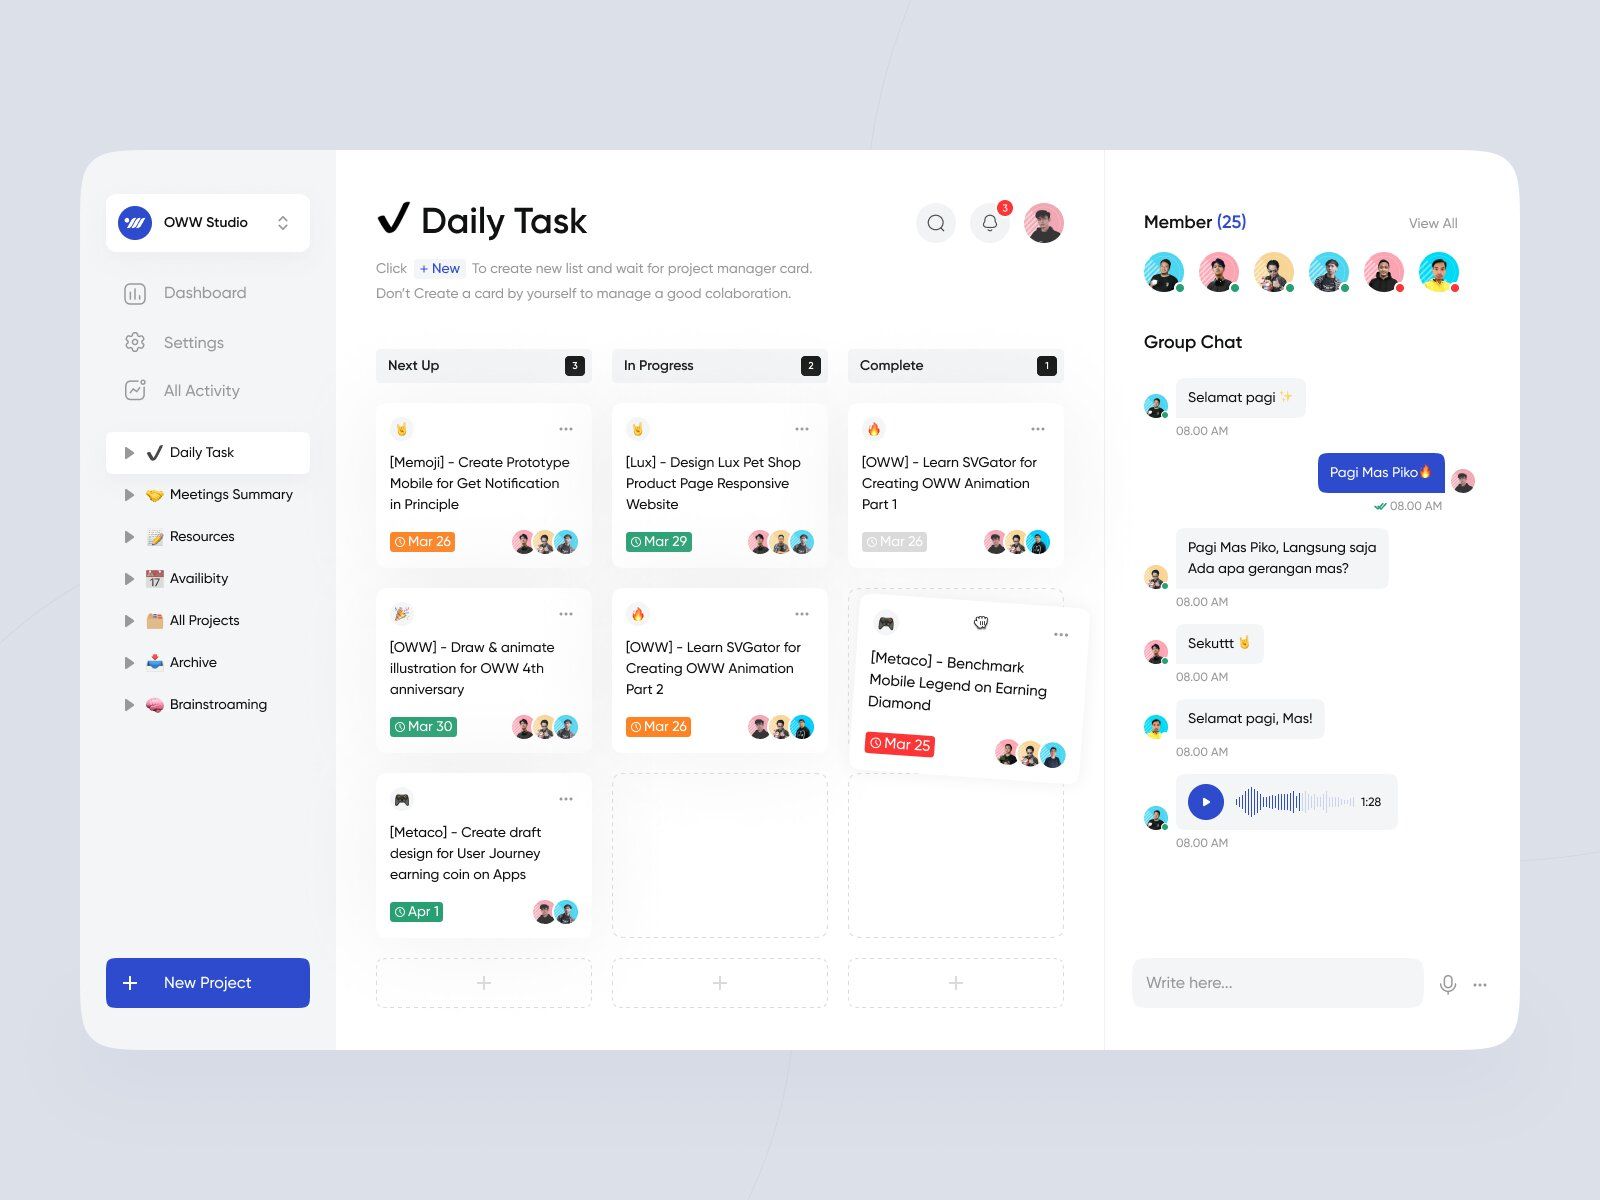 If you decide to build a task management app or web-product, 3rd-party integrations can help you with project management and teams collaboration by covering additional features (*image by [Happy Tri Milliarta](https://dribbble.com/milliarta){ rel="nofollow" target="_blank" .default-md}*)